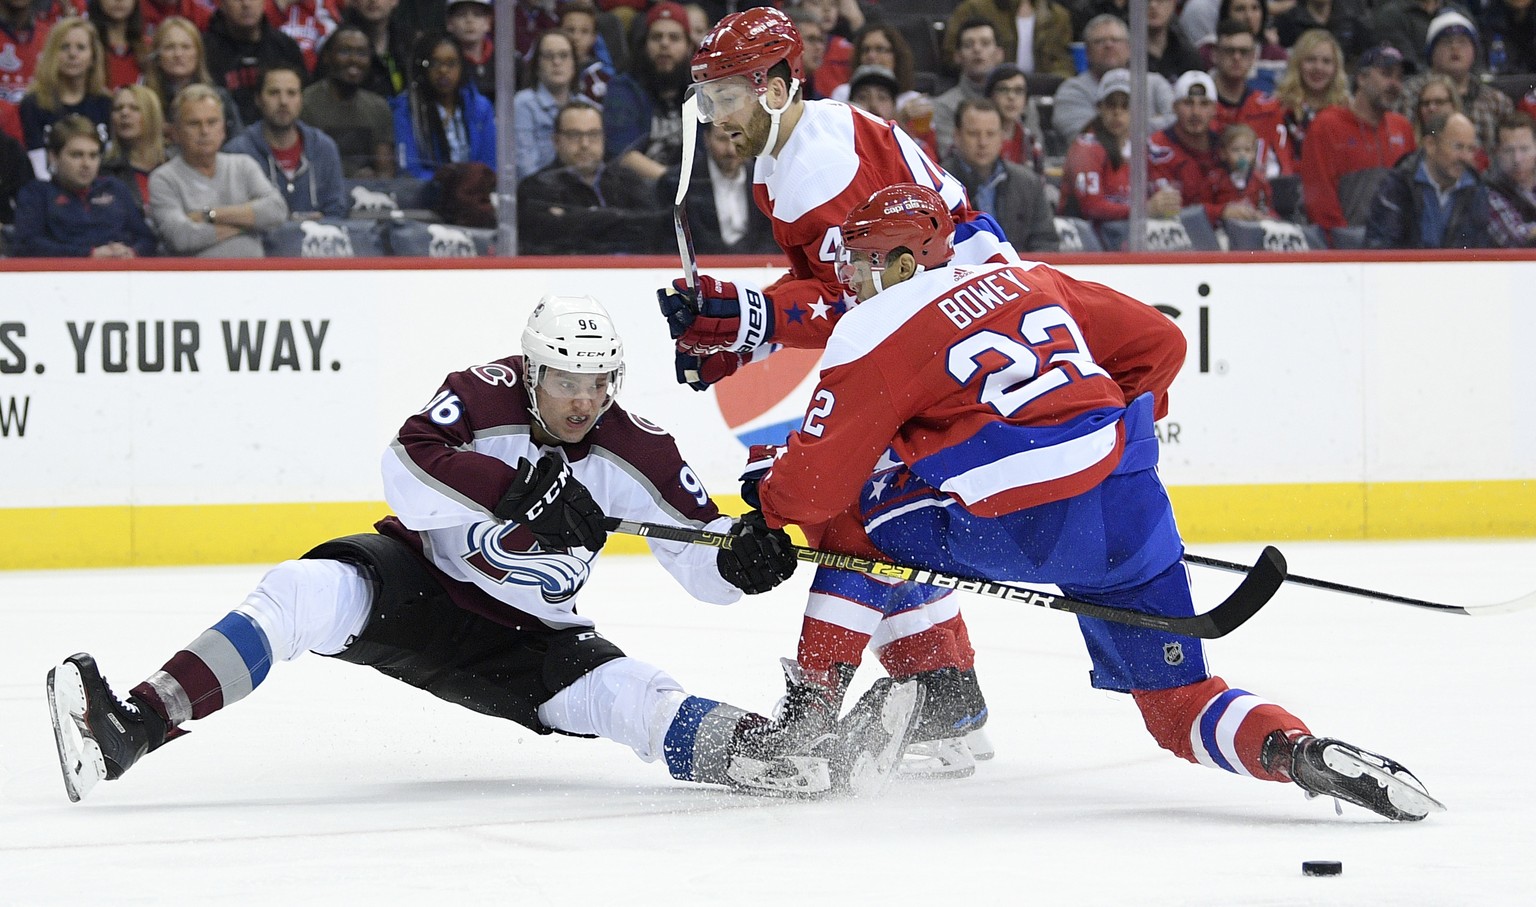 Colorado Avalanche right wing Mikko Rantanen (96), of Finland, fights for the puck against Washington Capitals defenseman Madison Bowey (22) and defenseman Brooks Orpik (44) during the first period of ...